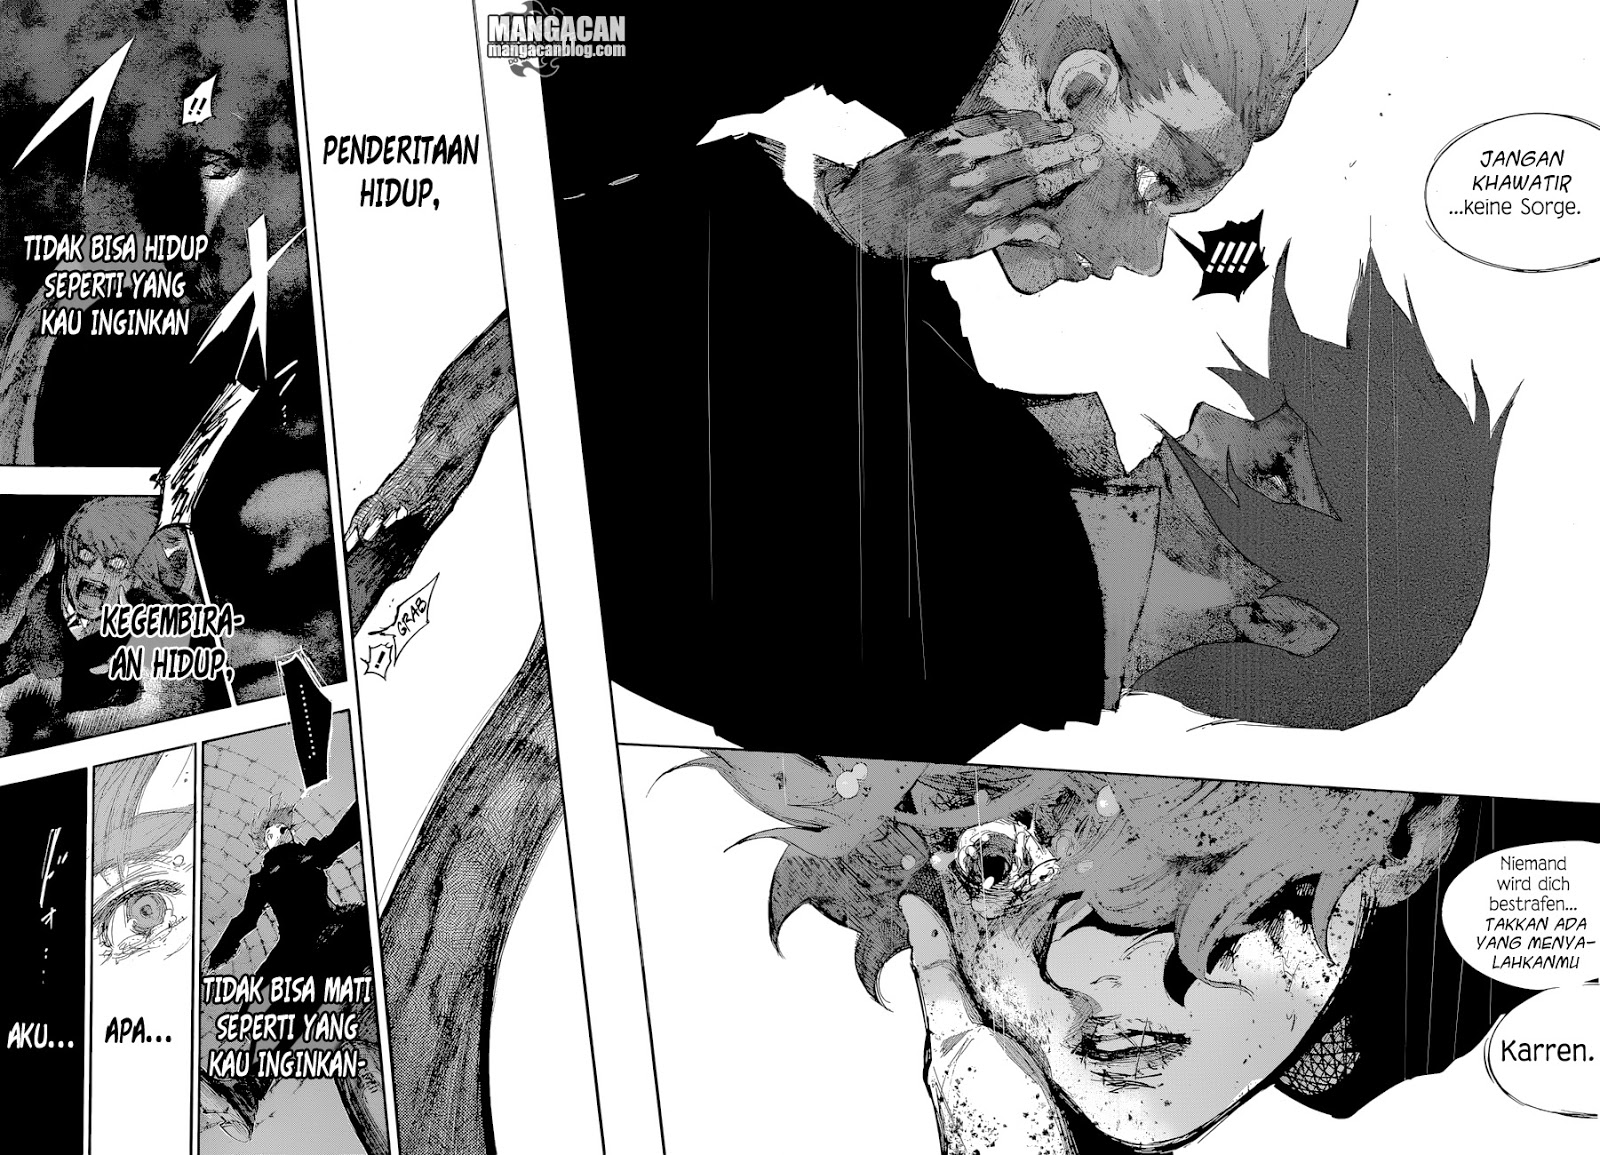 Tokyo Ghoul:re Chapter 57